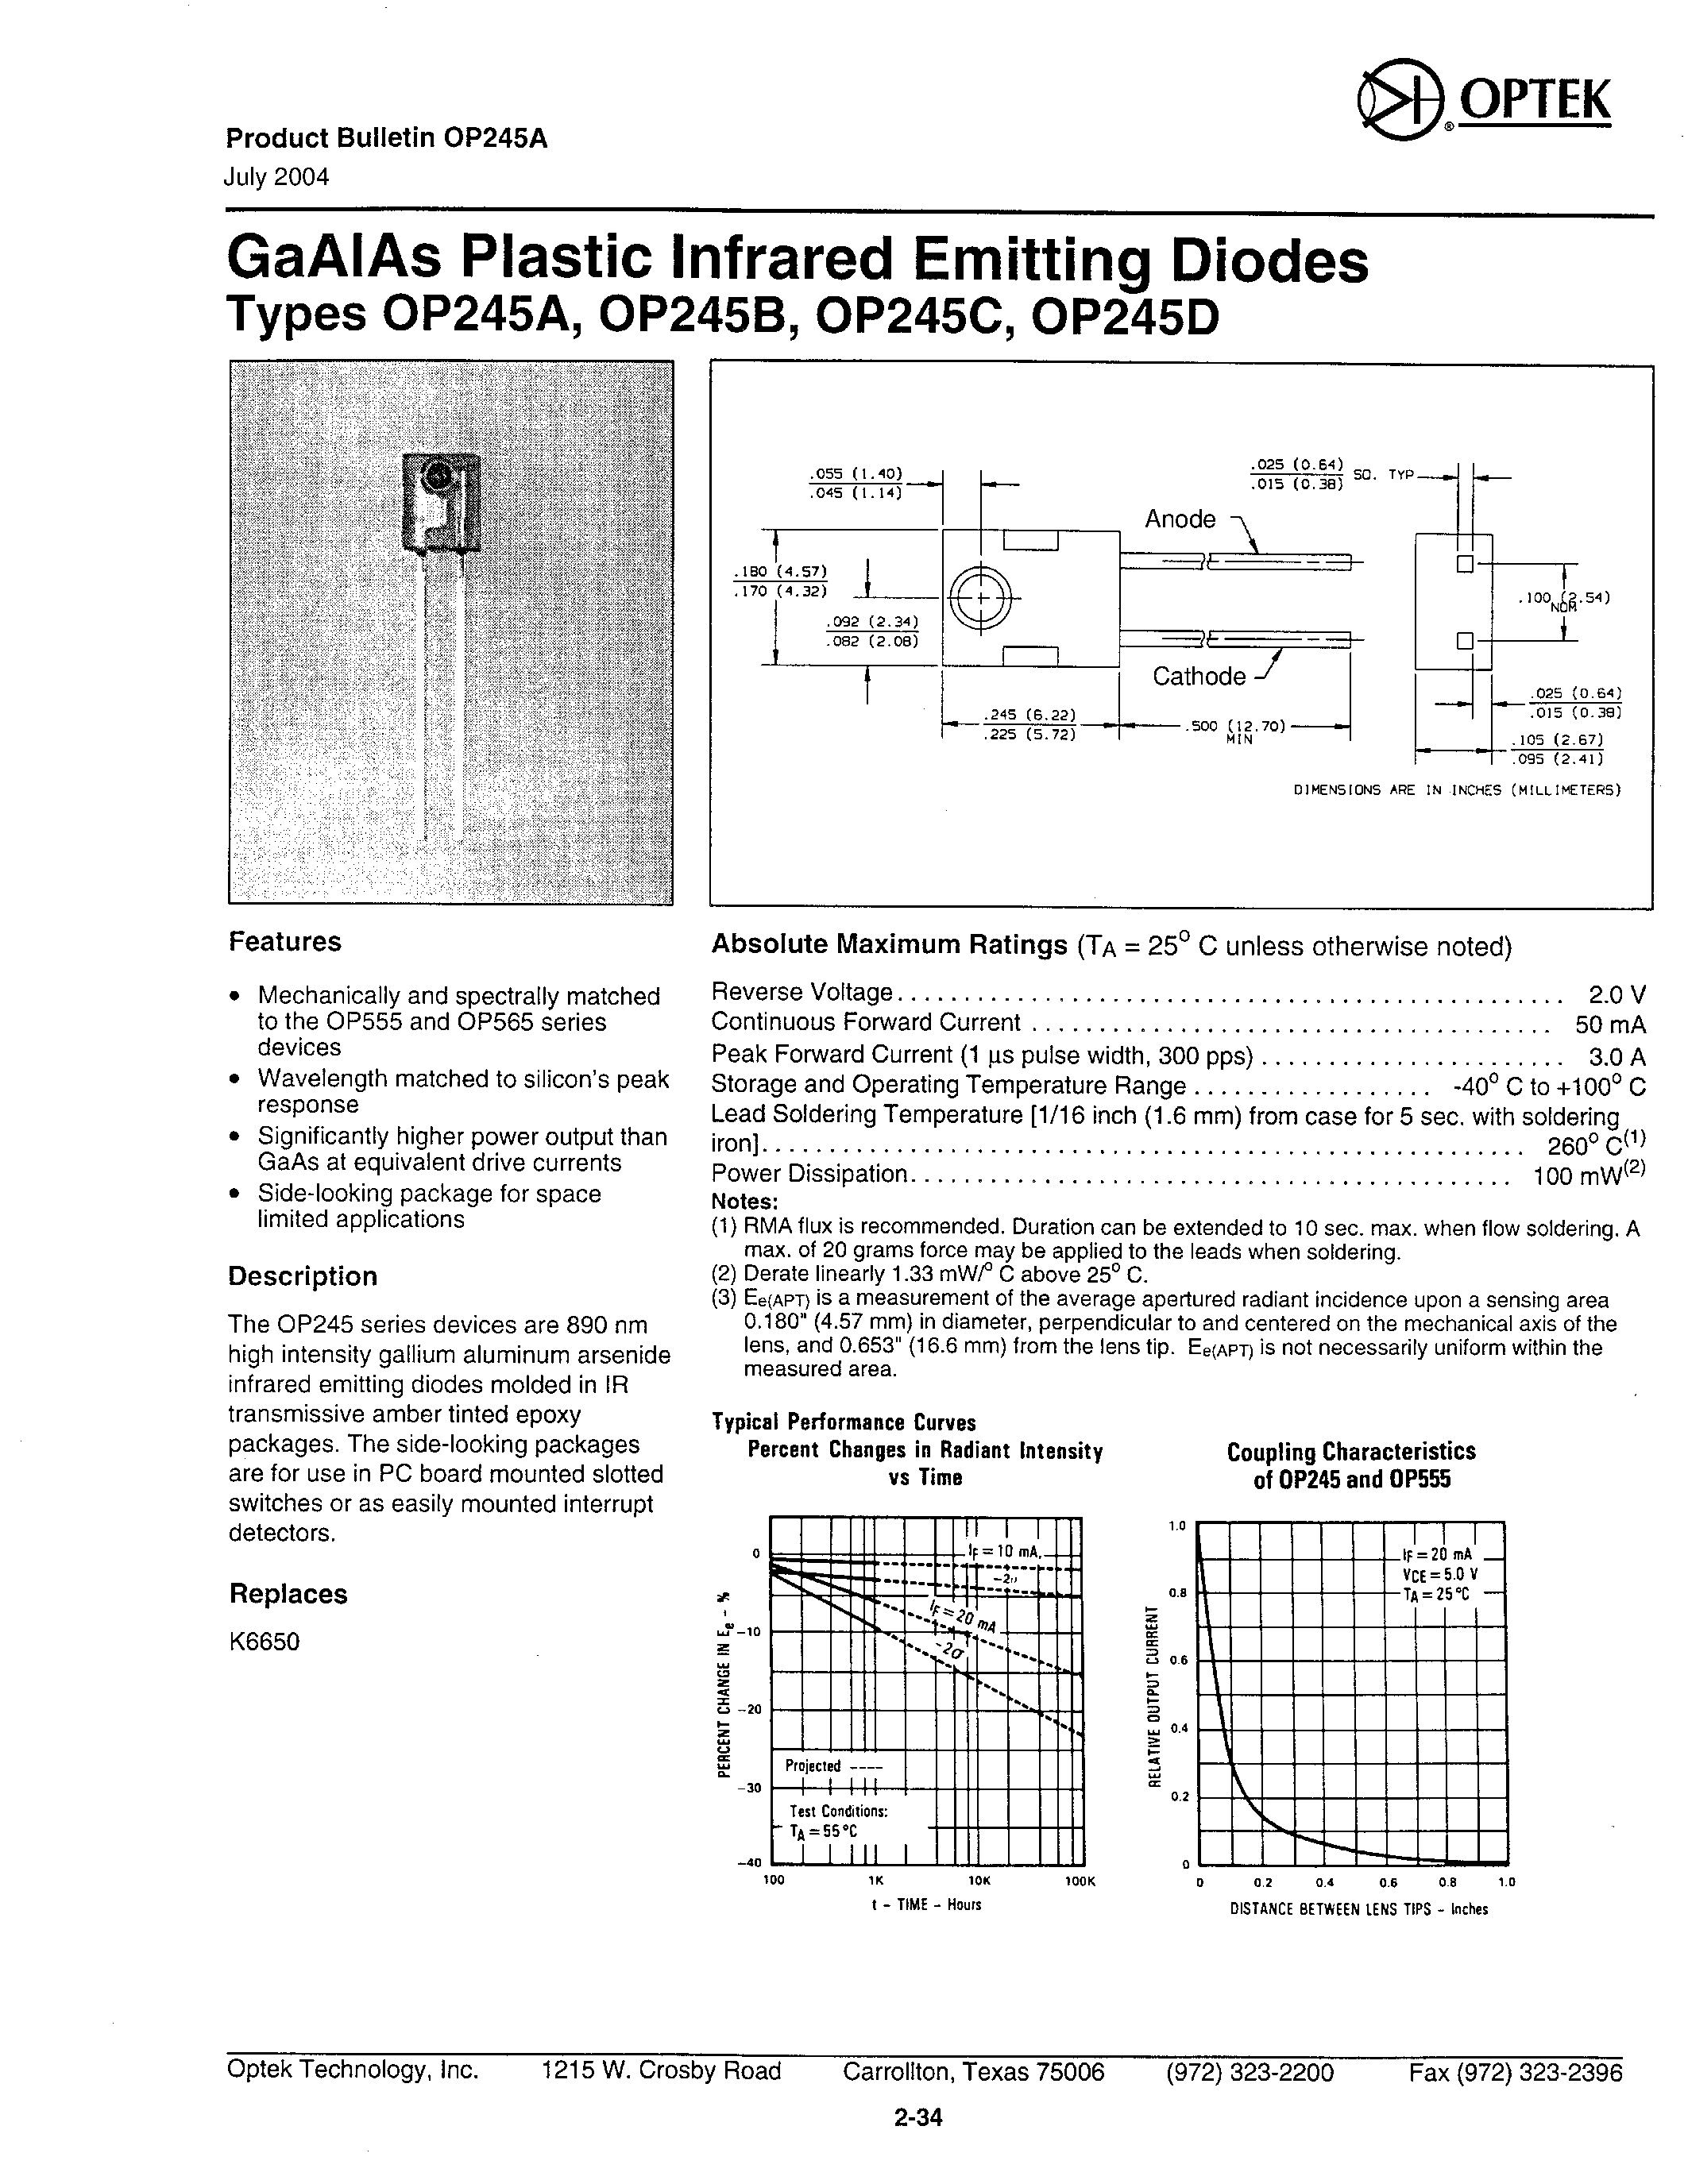 Даташит OP245A - GAAIAS PLASTIC INFRARED EMITTING DIODES страница 1